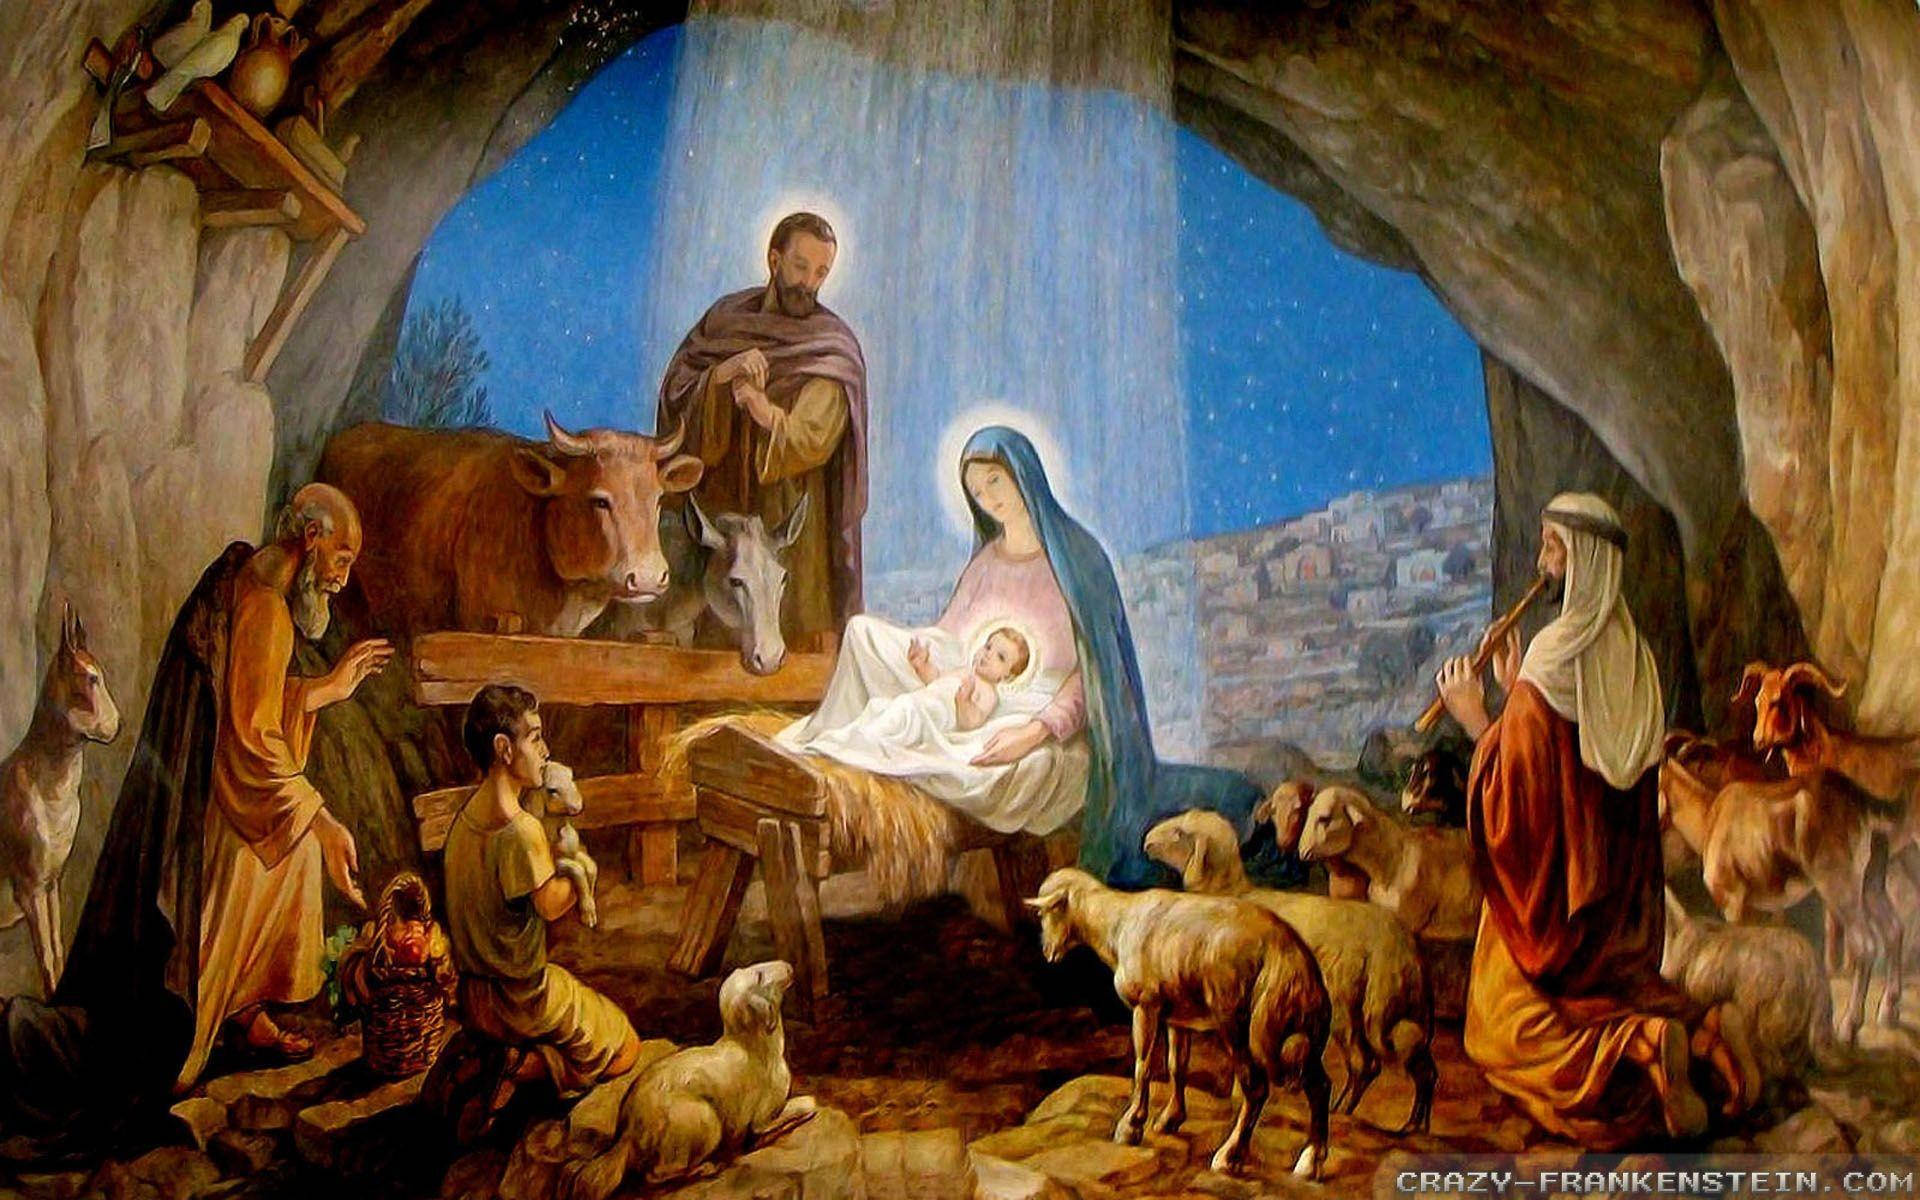 The Holy Family In The Stone Cave Wallpaper